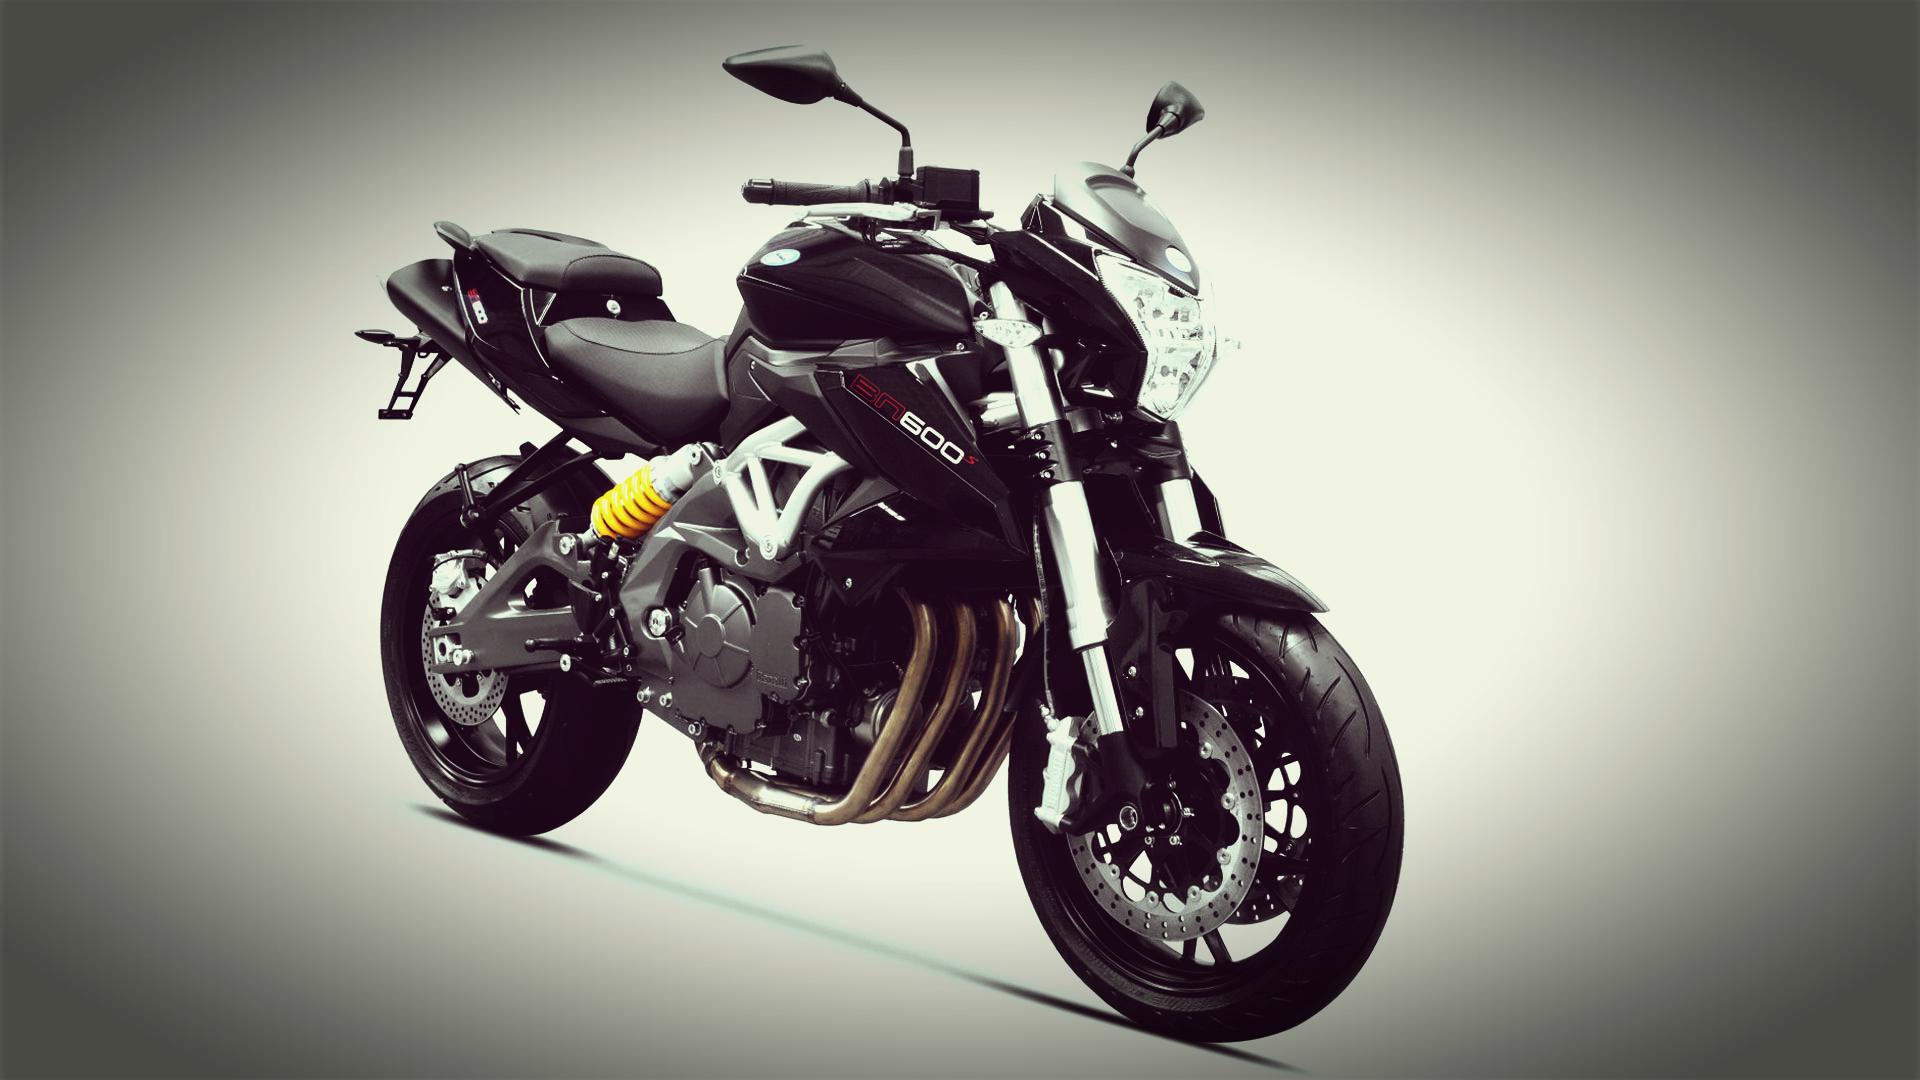 Benelli Motorbikes Wallpaper & Picture, Get Free top quality